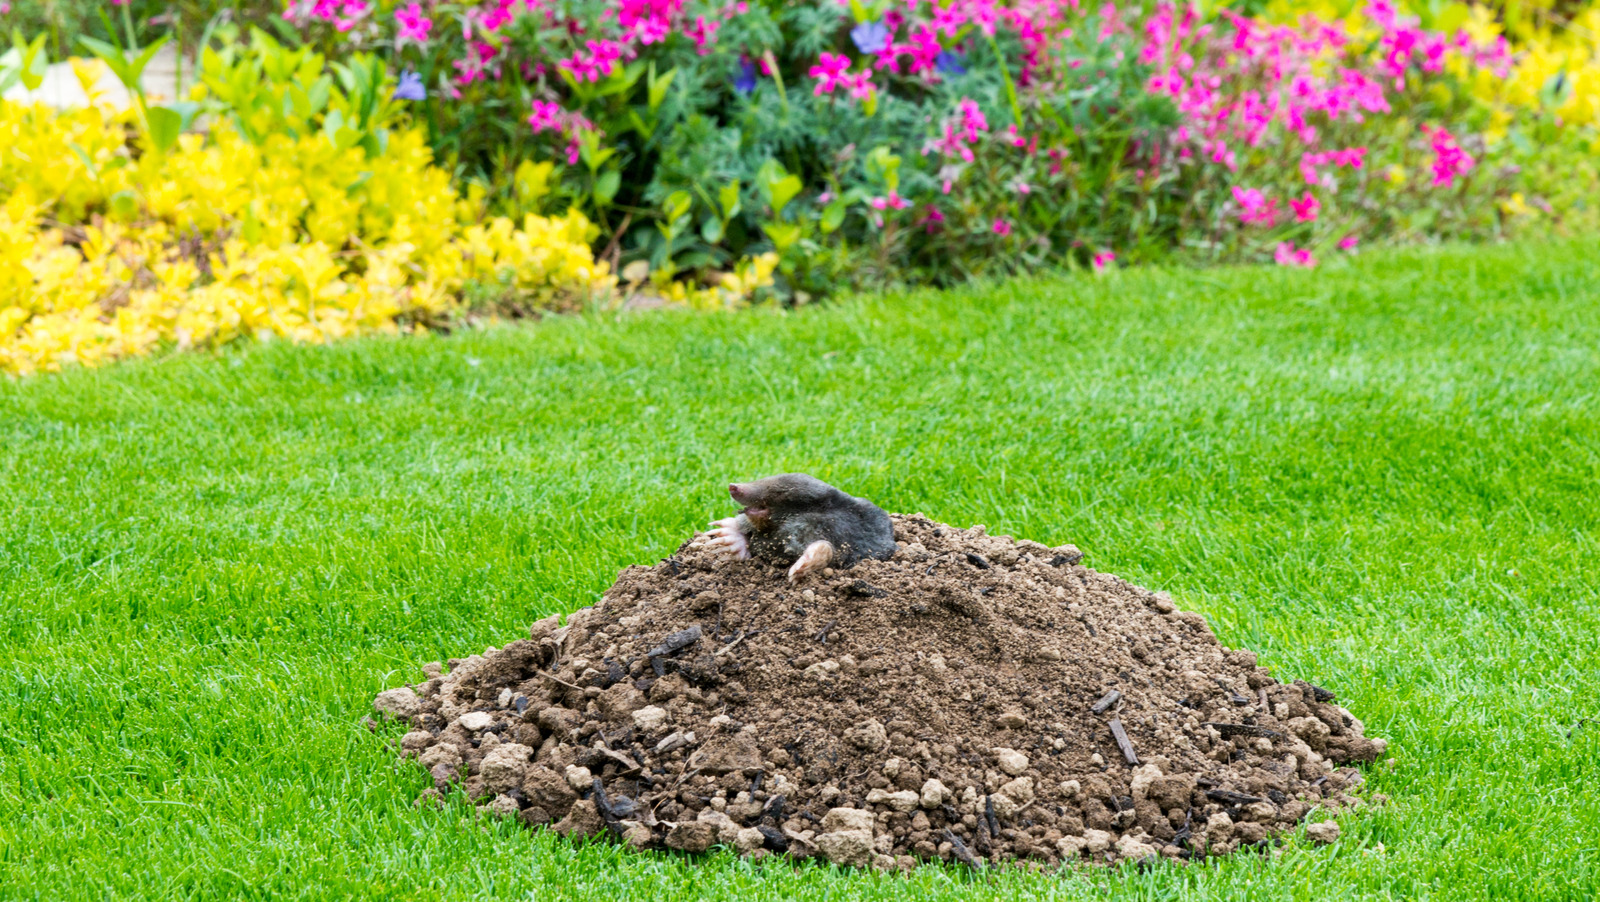 What's a Safe and Humane Way to Rid My Yard of Moles?